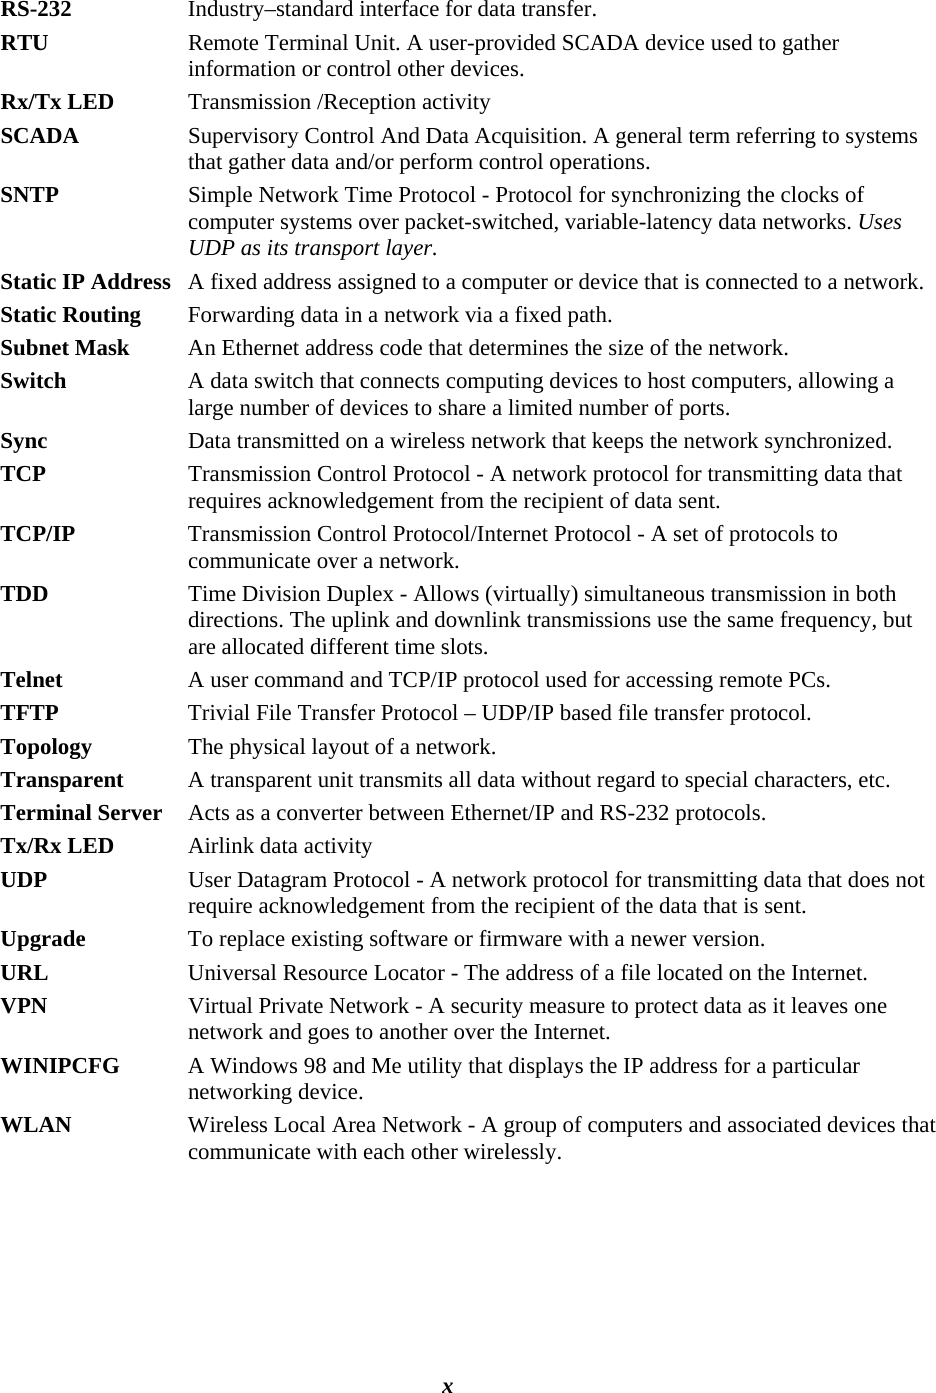  RS-232  Industry–standard interface for data transfer.  RTU  Remote Terminal Unit. A user-provided SCADA device used to gather information or control other devices. Rx/Tx LED  Transmission /Reception activity  SCADA  Supervisory Control And Data Acquisition. A general term referring to systems that gather data and/or perform control operations. SNTP  Simple Network Time Protocol - Protocol for synchronizing the clocks of computer systems over packet-switched, variable-latency data networks. Uses UDP as its transport layer. Static IP Address   A fixed address assigned to a computer or device that is connected to a network. Static Routing   Forwarding data in a network via a fixed path. Subnet Mask   An Ethernet address code that determines the size of the network. Switch   A data switch that connects computing devices to host computers, allowing a large number of devices to share a limited number of ports.  Sync   Data transmitted on a wireless network that keeps the network synchronized.  TCP   Transmission Control Protocol - A network protocol for transmitting data that requires acknowledgement from the recipient of data sent. TCP/IP   Transmission Control Protocol/Internet Protocol - A set of protocols to communicate over a network. TDD  Time Division Duplex - Allows (virtually) simultaneous transmission in both directions. The uplink and downlink transmissions use the same frequency, but are allocated different time slots. Telnet   A user command and TCP/IP protocol used for accessing remote PCs. TFTP   Trivial File Transfer Protocol – UDP/IP based file transfer protocol. Topology   The physical layout of a network. Transparent  A transparent unit transmits all data without regard to special characters, etc. Terminal Server  Acts as a converter between Ethernet/IP and RS-232 protocols. Tx/Rx LED  Airlink data activity UDP   User Datagram Protocol - A network protocol for transmitting data that does not require acknowledgement from the recipient of the data that is sent. Upgrade   To replace existing software or firmware with a newer version. URL   Universal Resource Locator - The address of a file located on the Internet. VPN   Virtual Private Network - A security measure to protect data as it leaves one network and goes to another over the Internet. WINIPCFG   A Windows 98 and Me utility that displays the IP address for a particular networking device.  WLAN   Wireless Local Area Network - A group of computers and associated devices that communicate with each other wirelessly. 120 40520-100a    ViPR User Manual  x